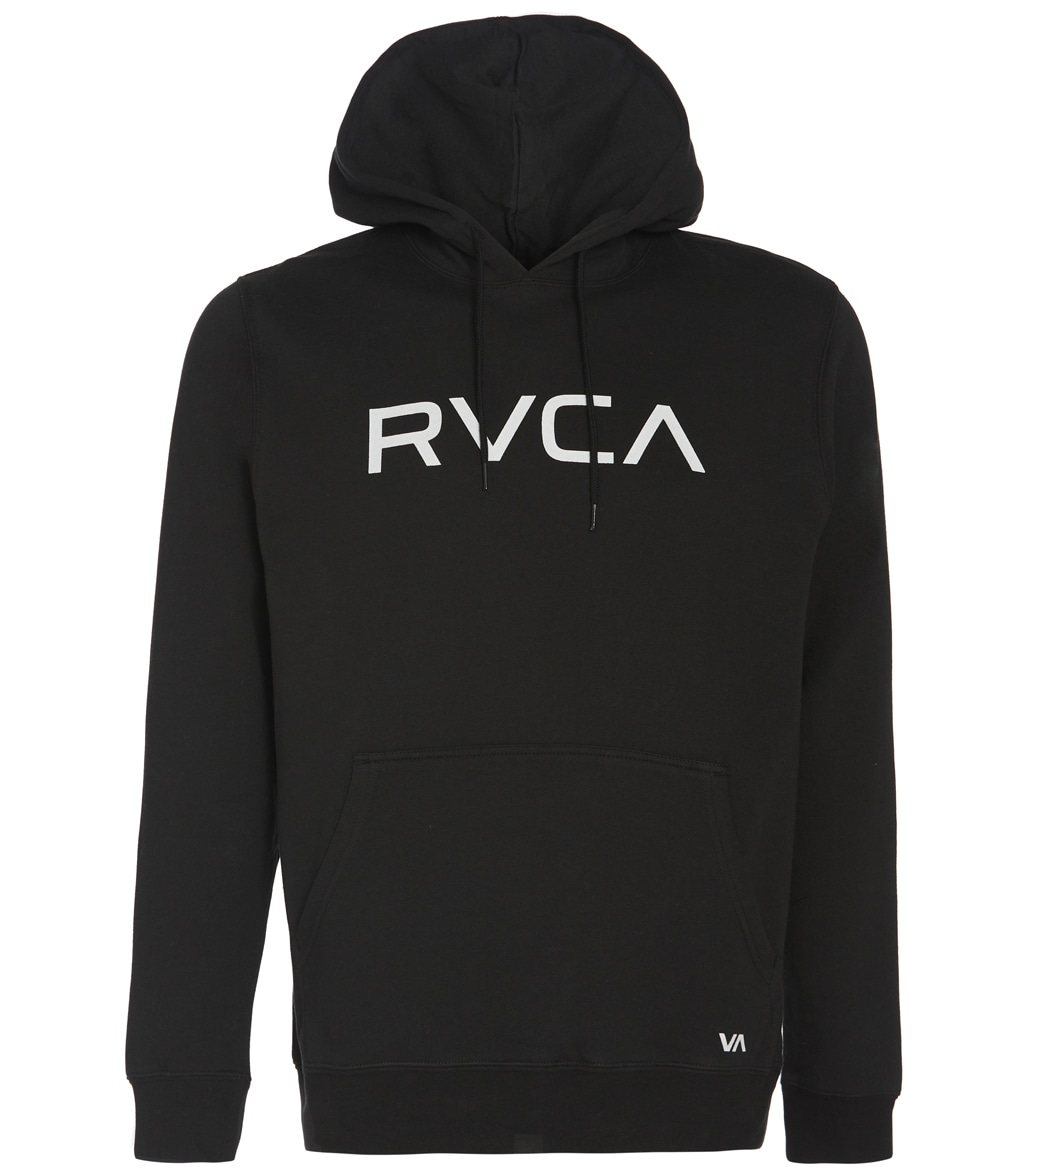 Rvca Men's Big Pullover Hoodie - Black Large Cotton/Polyester - Swimoutlet.com